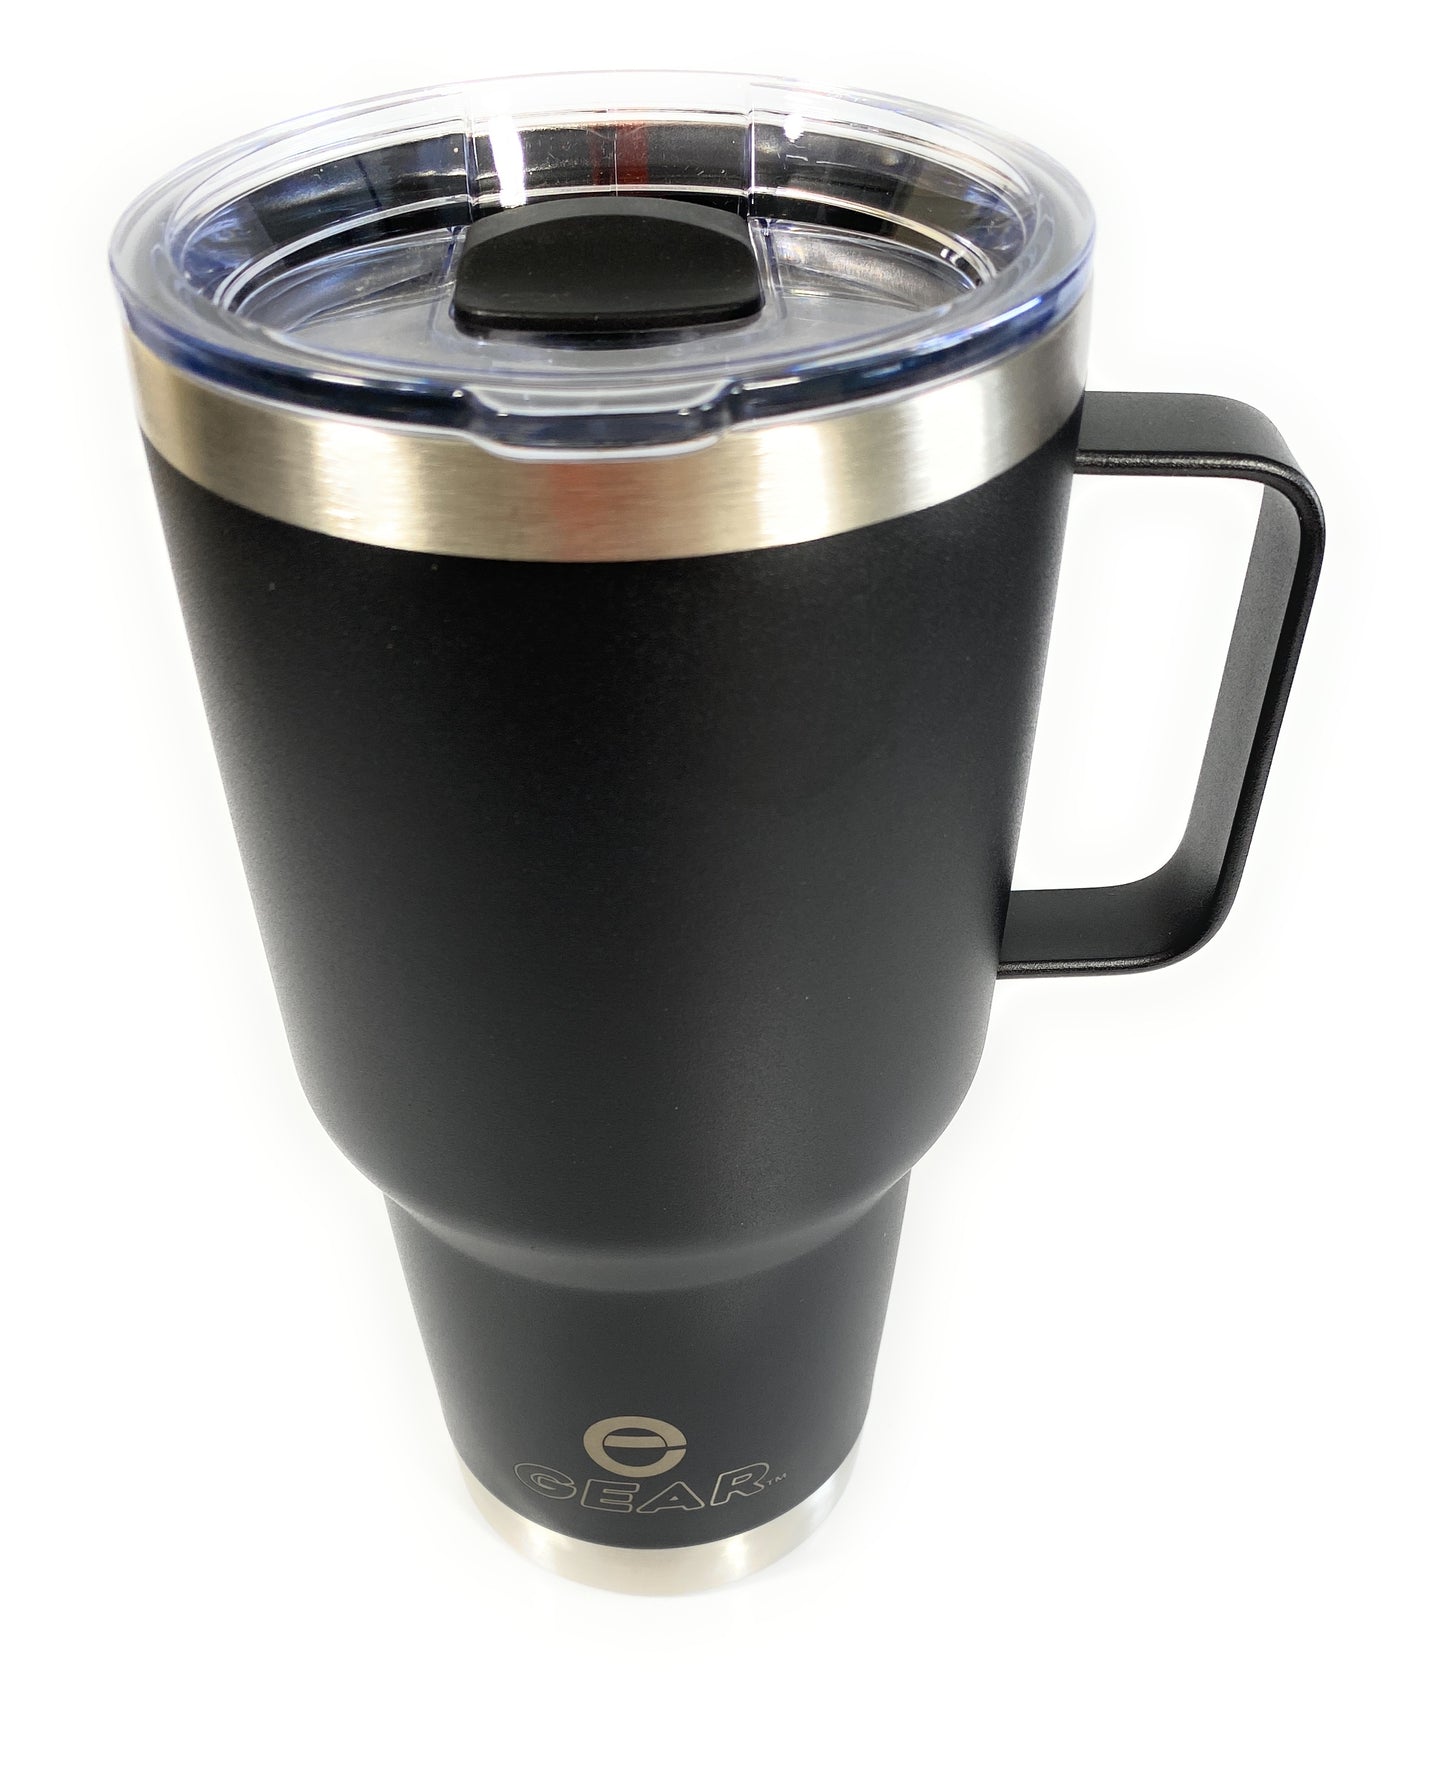 Enthusiast Gear 30 oz Tumbler with Magnetic Slider Lid and Handle, Stainless Steel, Vacuum Insulated for Hot and Cold Drinks